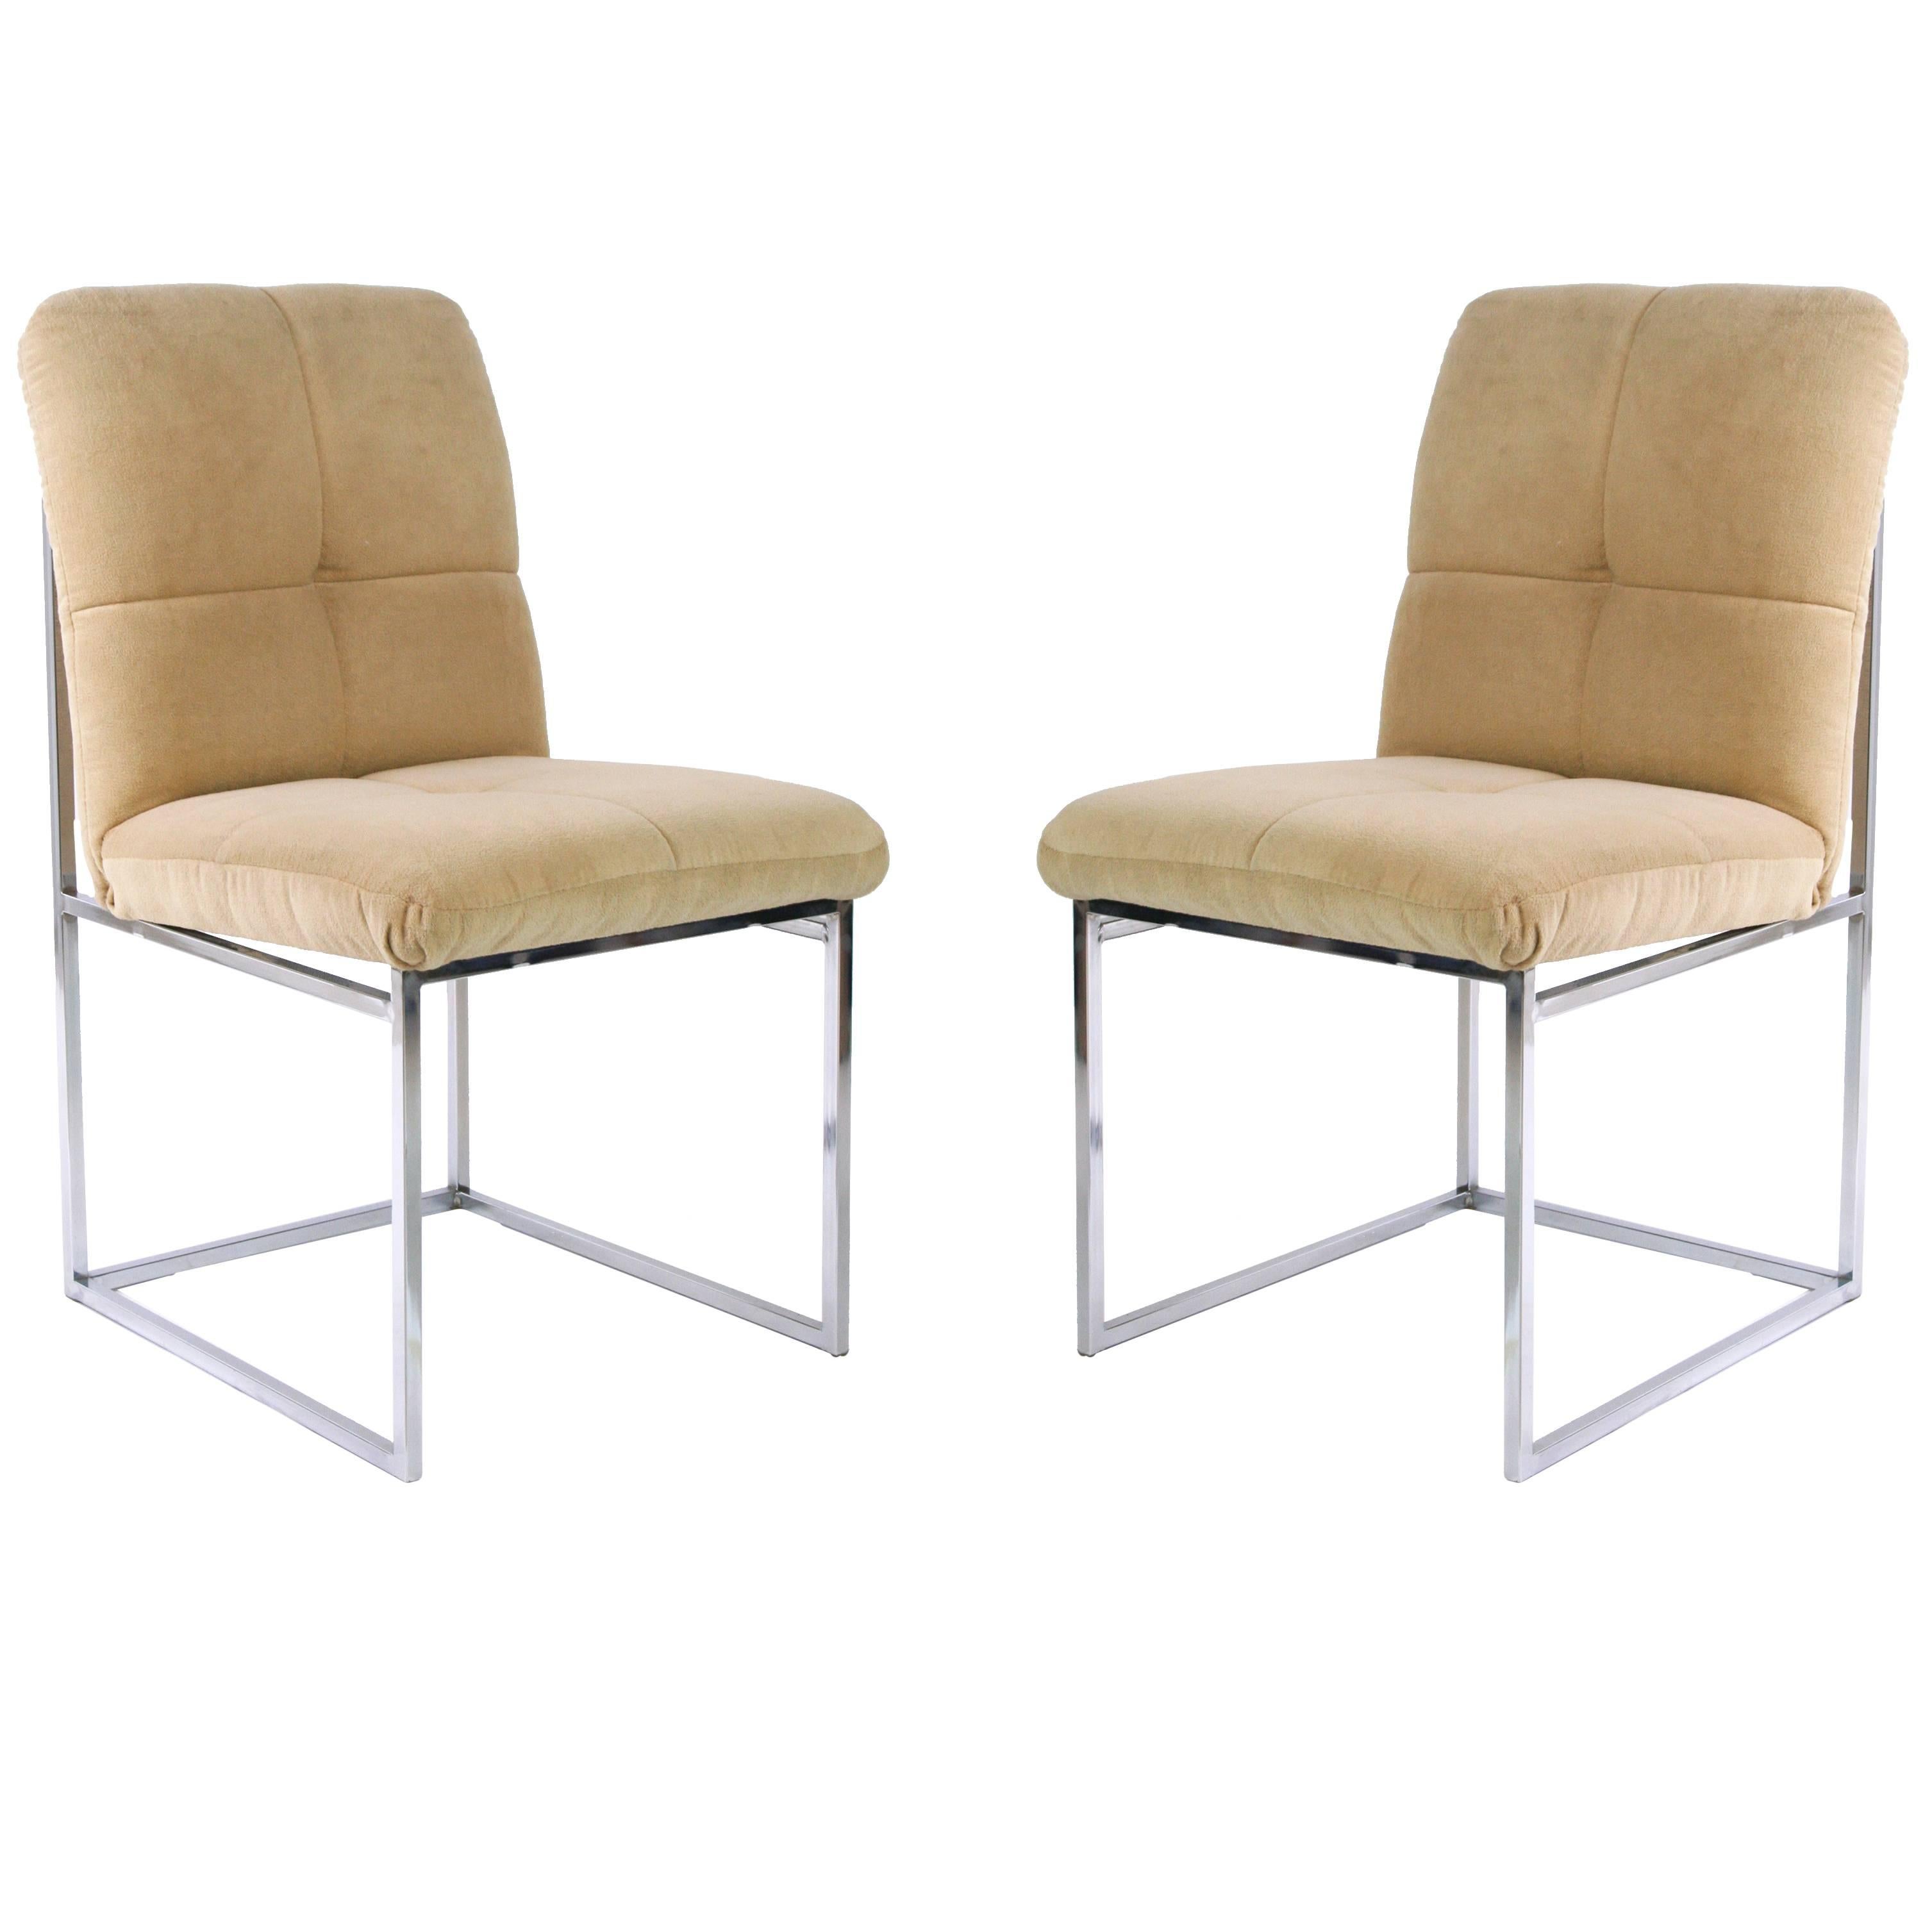 Pair of Cal-Style Side Chairs